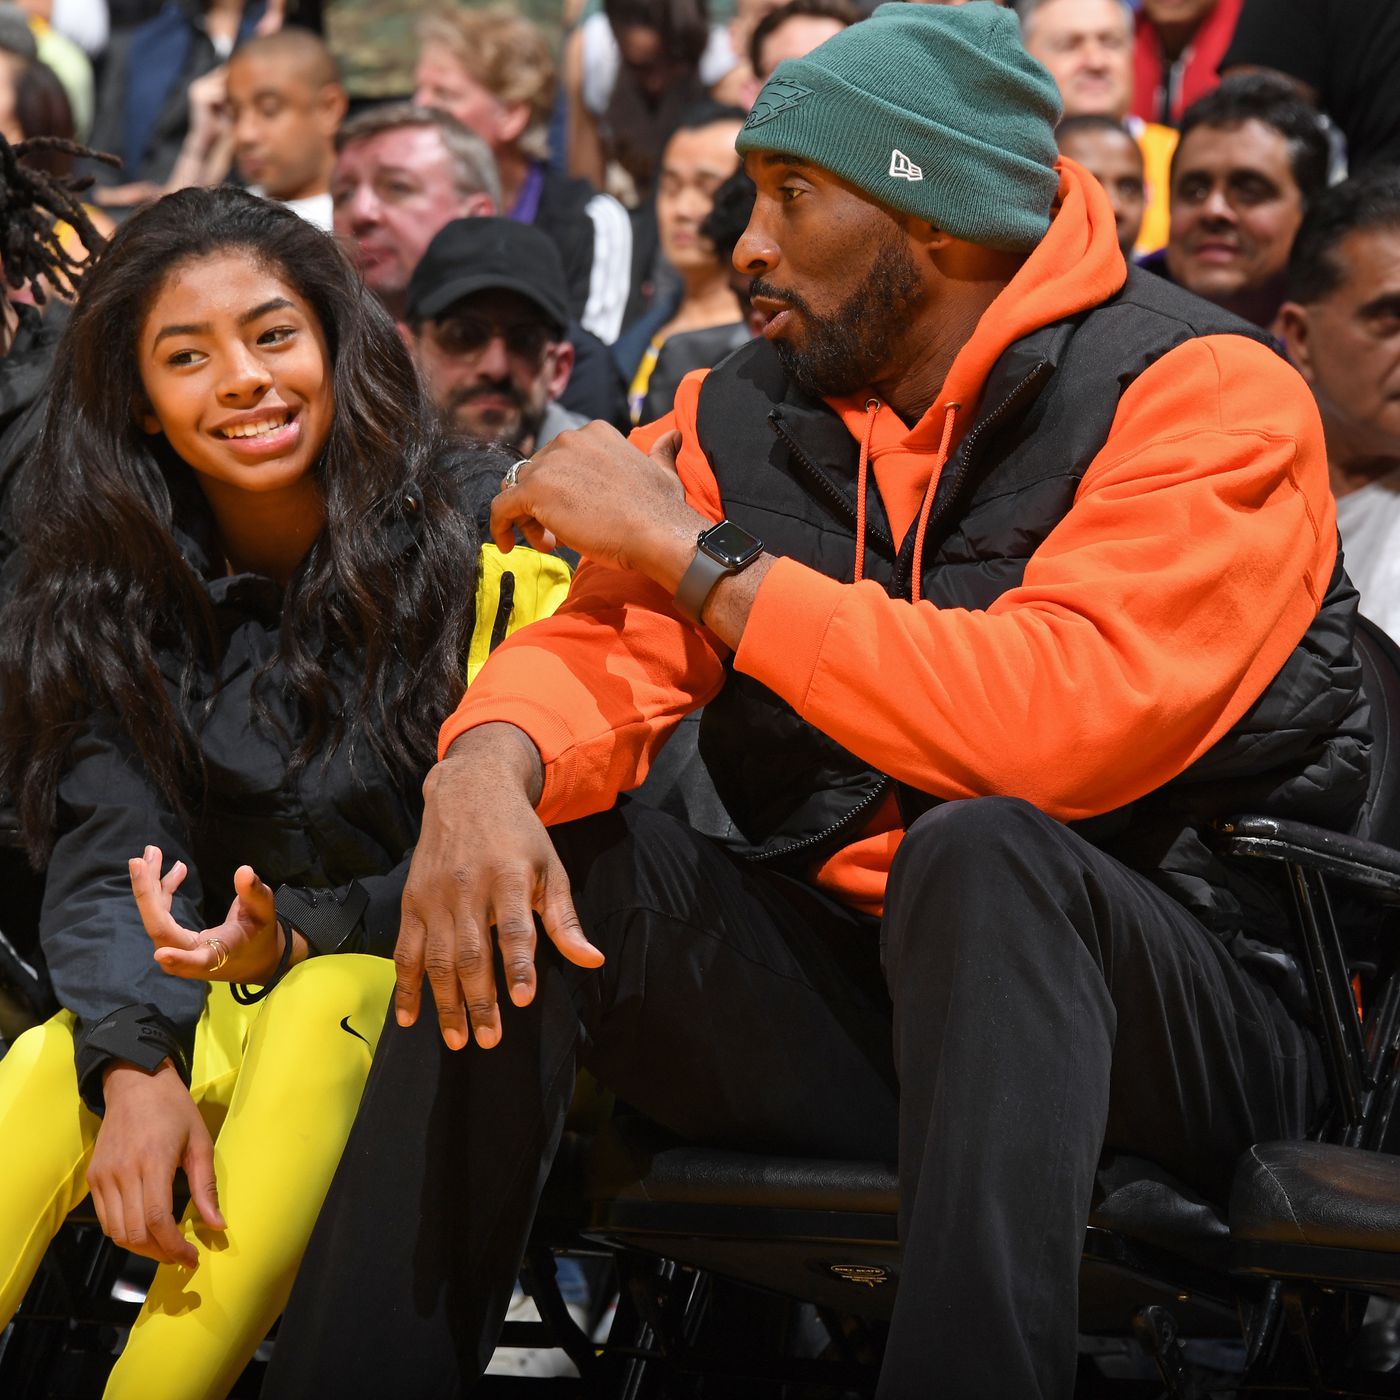 Kobe Bryant And His Daughter Gianna Shared A Love Of The Game Vox